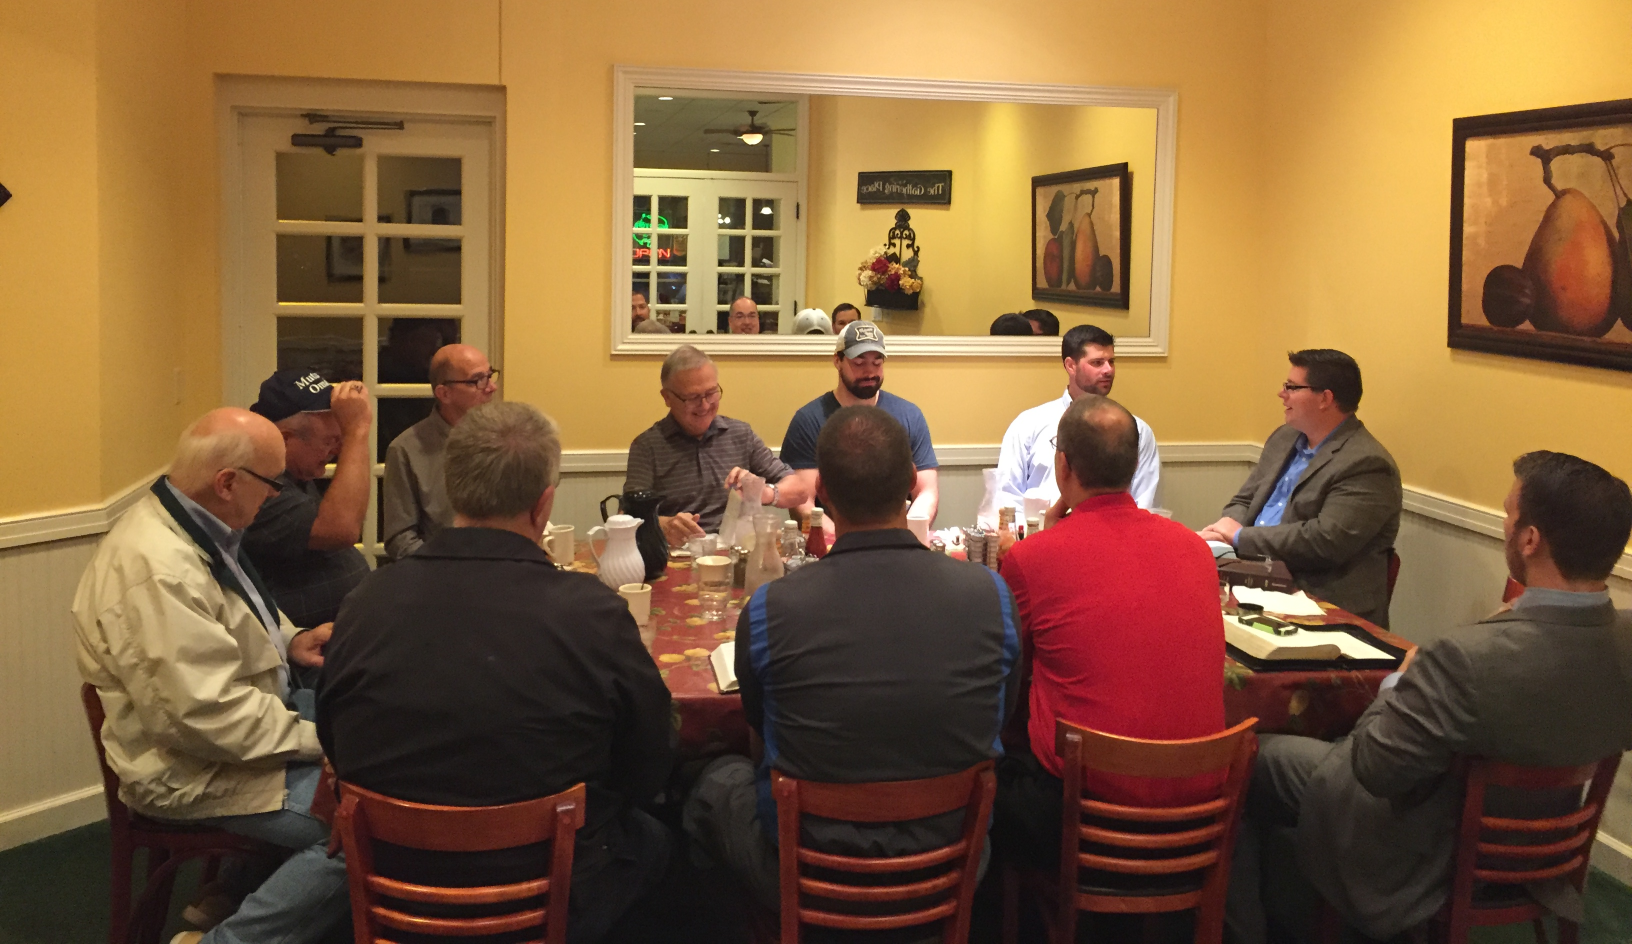 Heartland CBMC Bible Study Groups meet weekly throughout the greater Omaha area.  Business men can share and grow in their faith and understanding of God’s word.